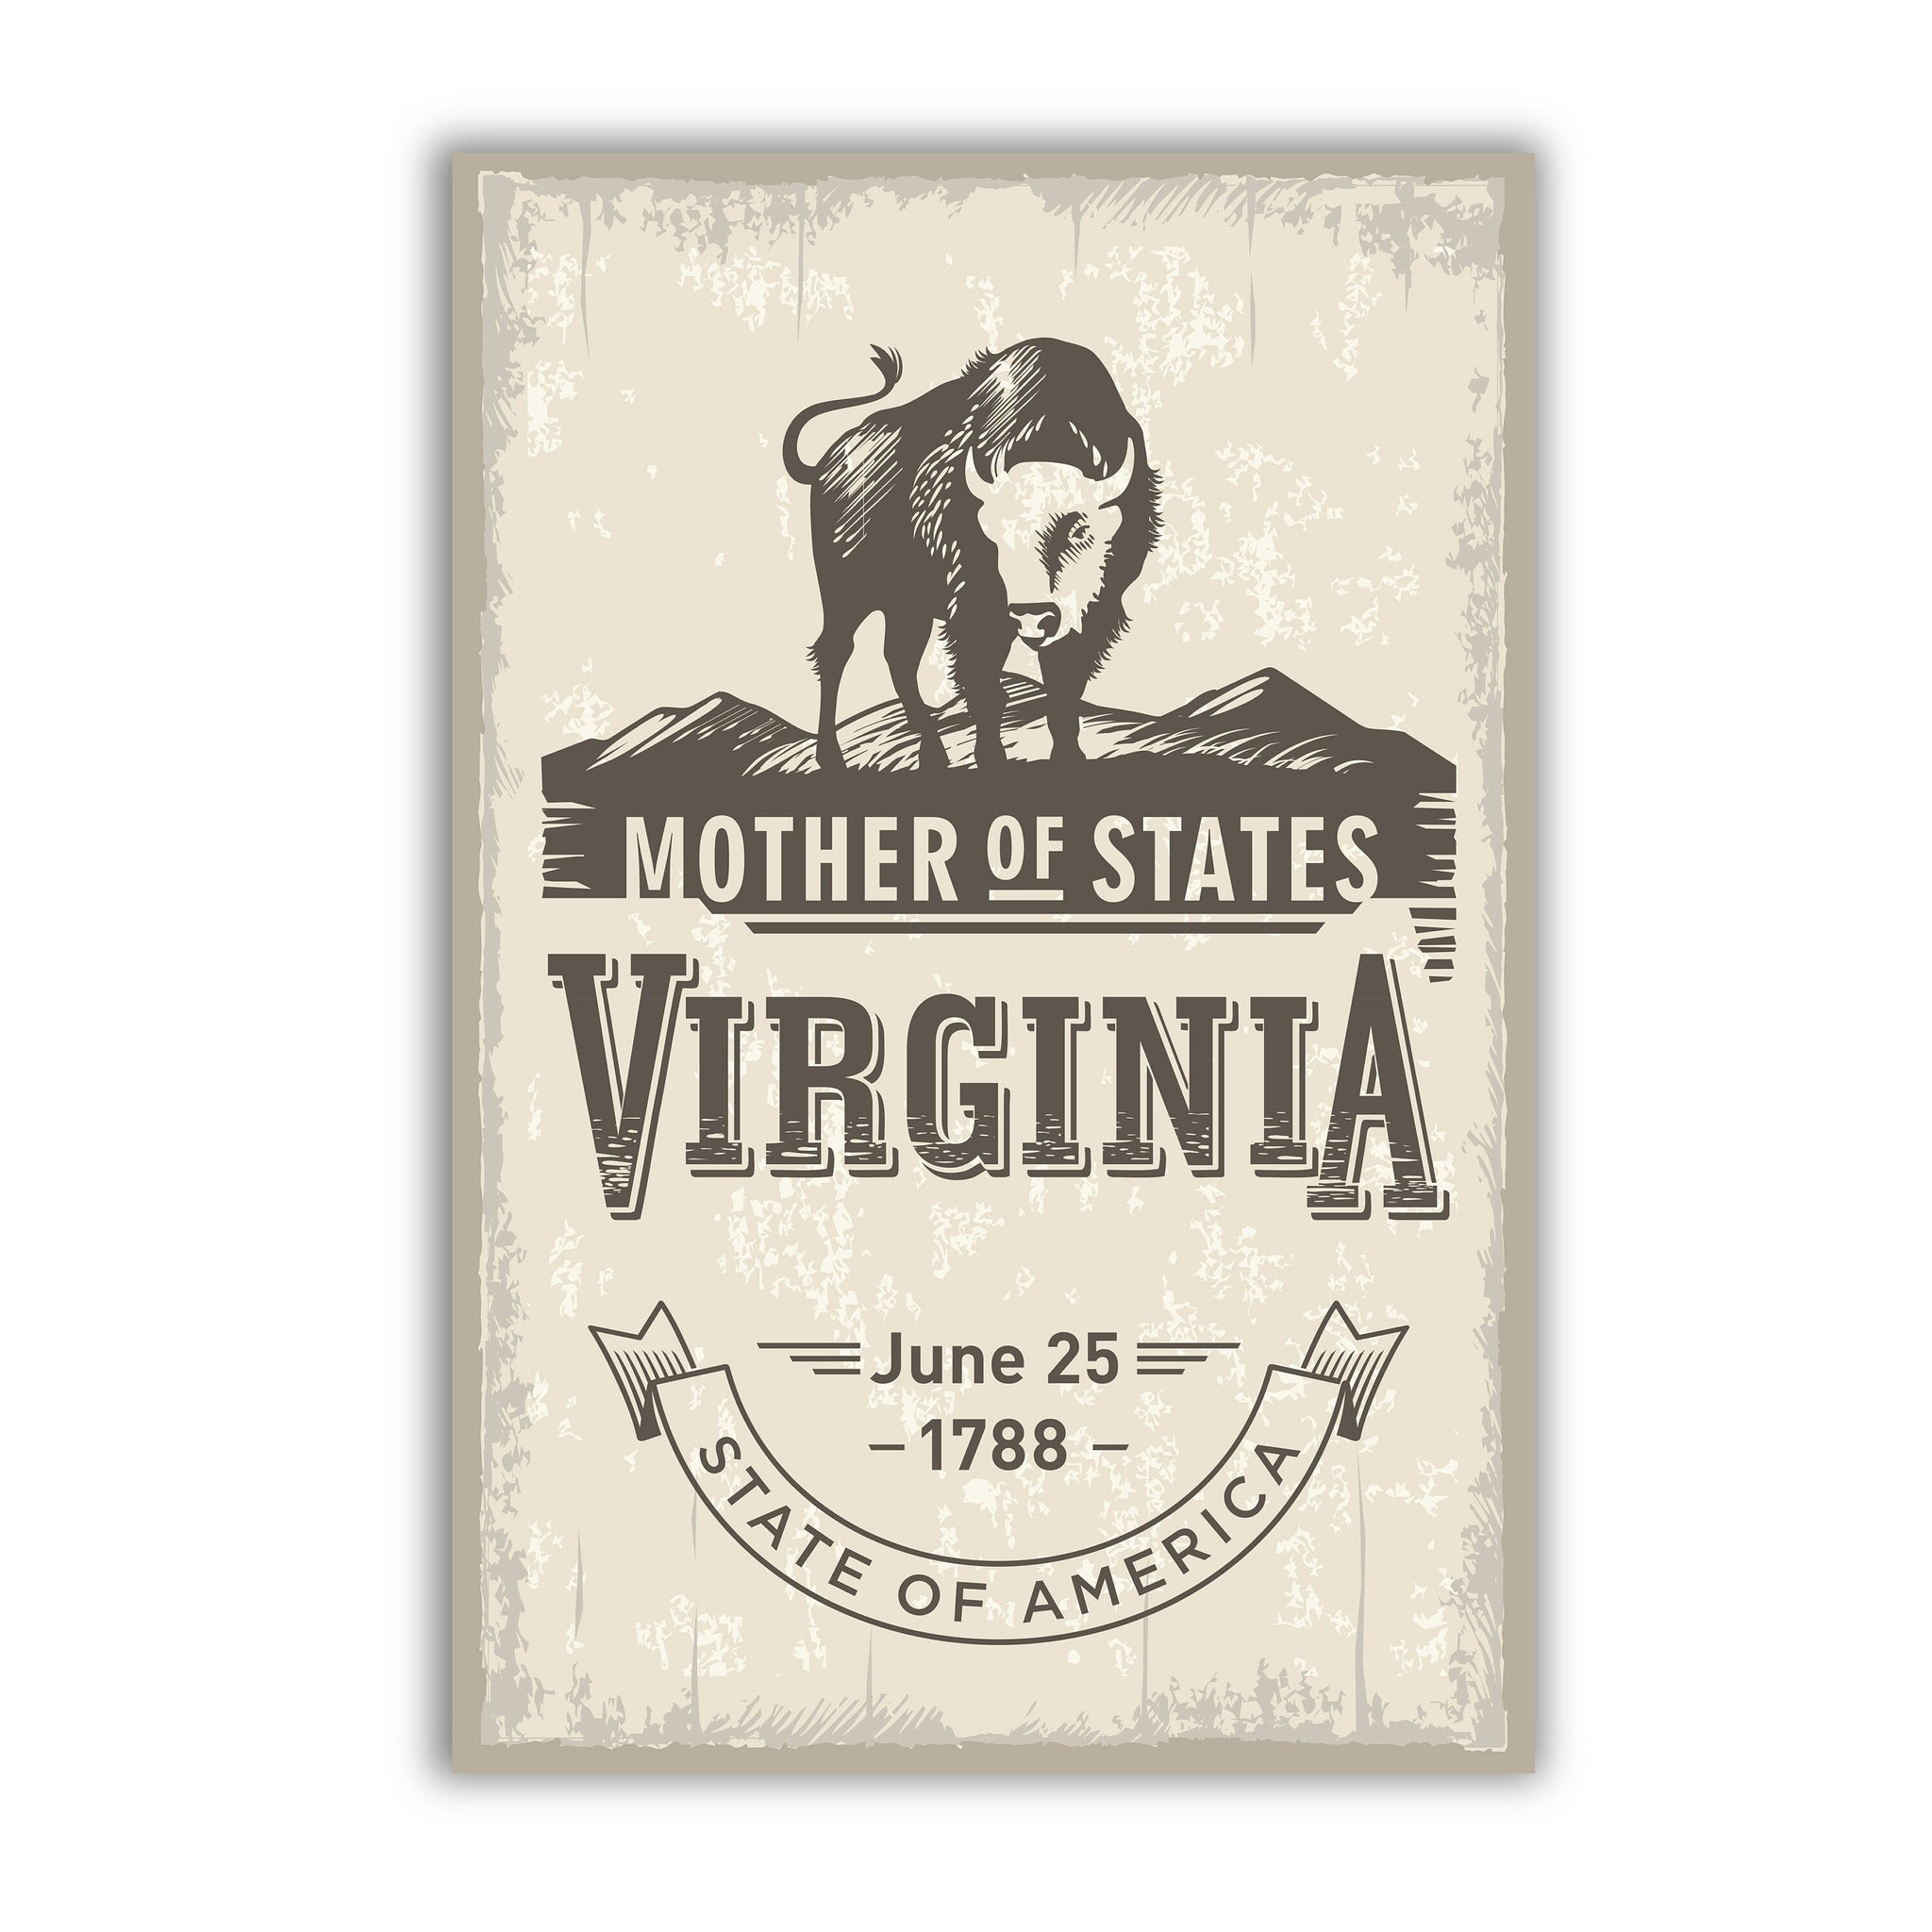 Virginia State Symbol Poster, Virginia Poster Print, Virginia State Emblem Poster, Retro Travel State Poster, Home and Office Wall Art